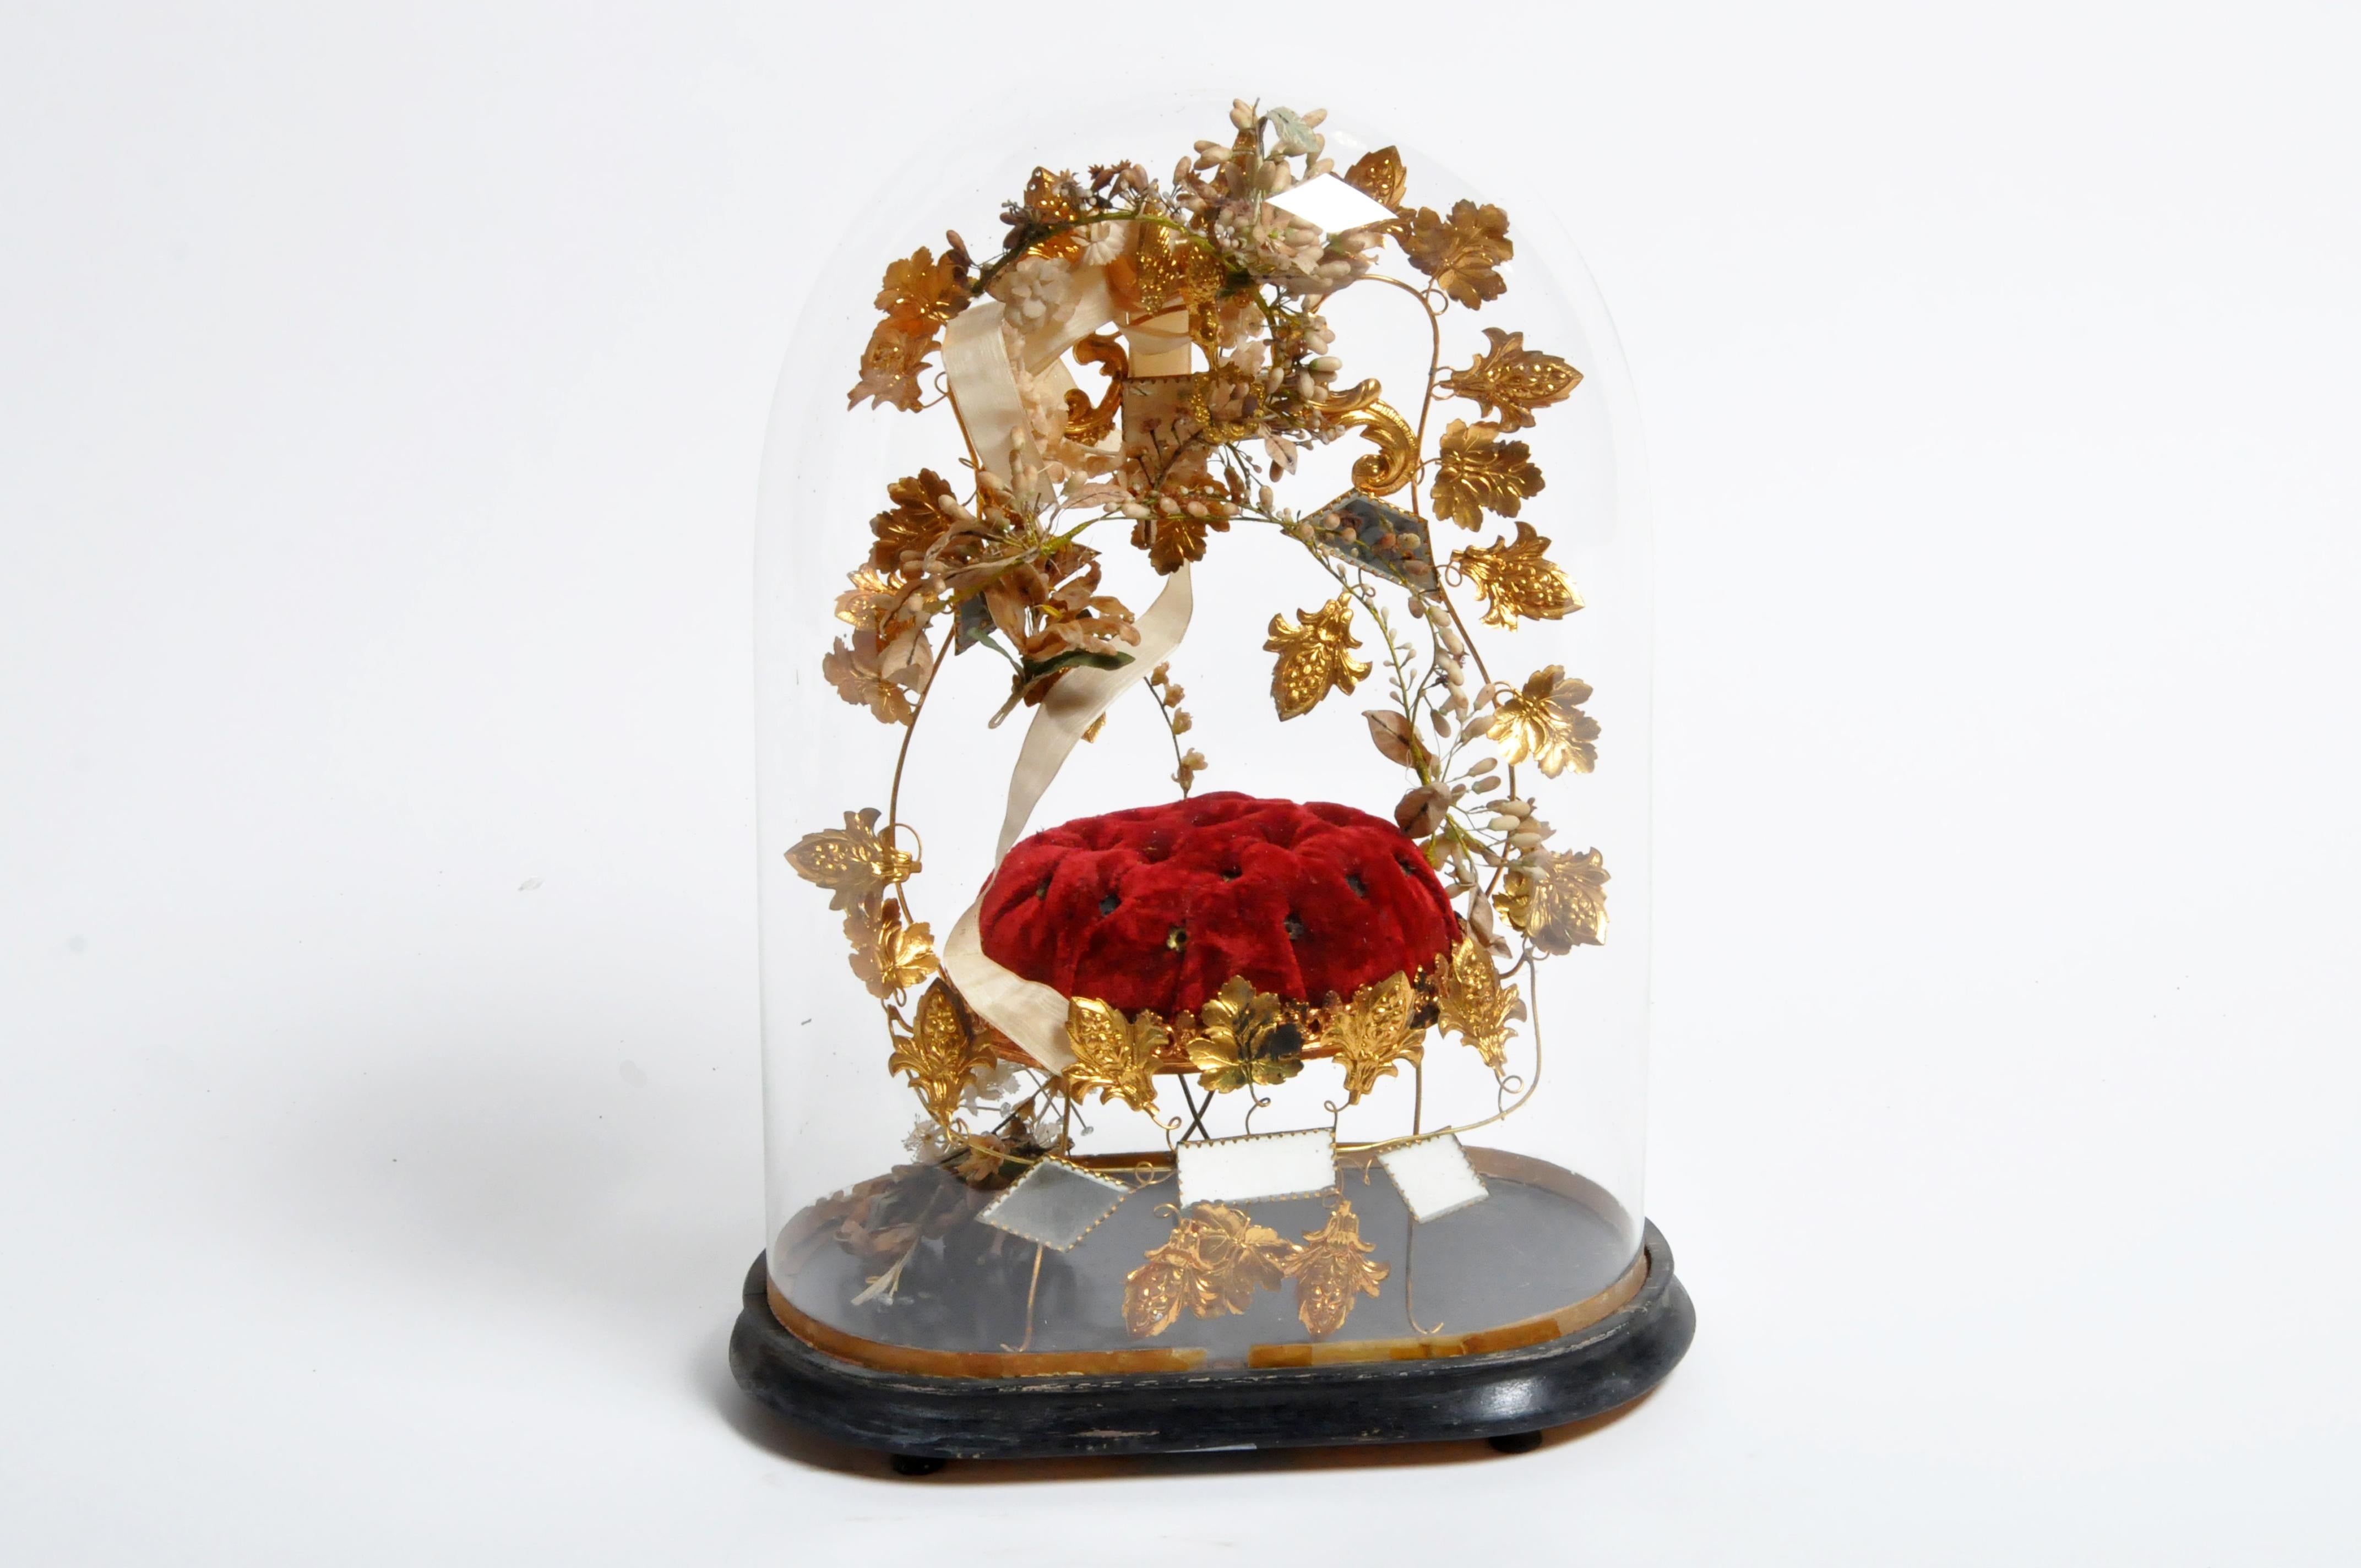 Quite the curiosity, this glass dome is more like a time capsule. Inside of the glass dome is an upholstered cushion with a frame and legs made of gilt foliage, porcelain flowers, and mirrored glass. A bird-form finial holding a wreath of laurel in